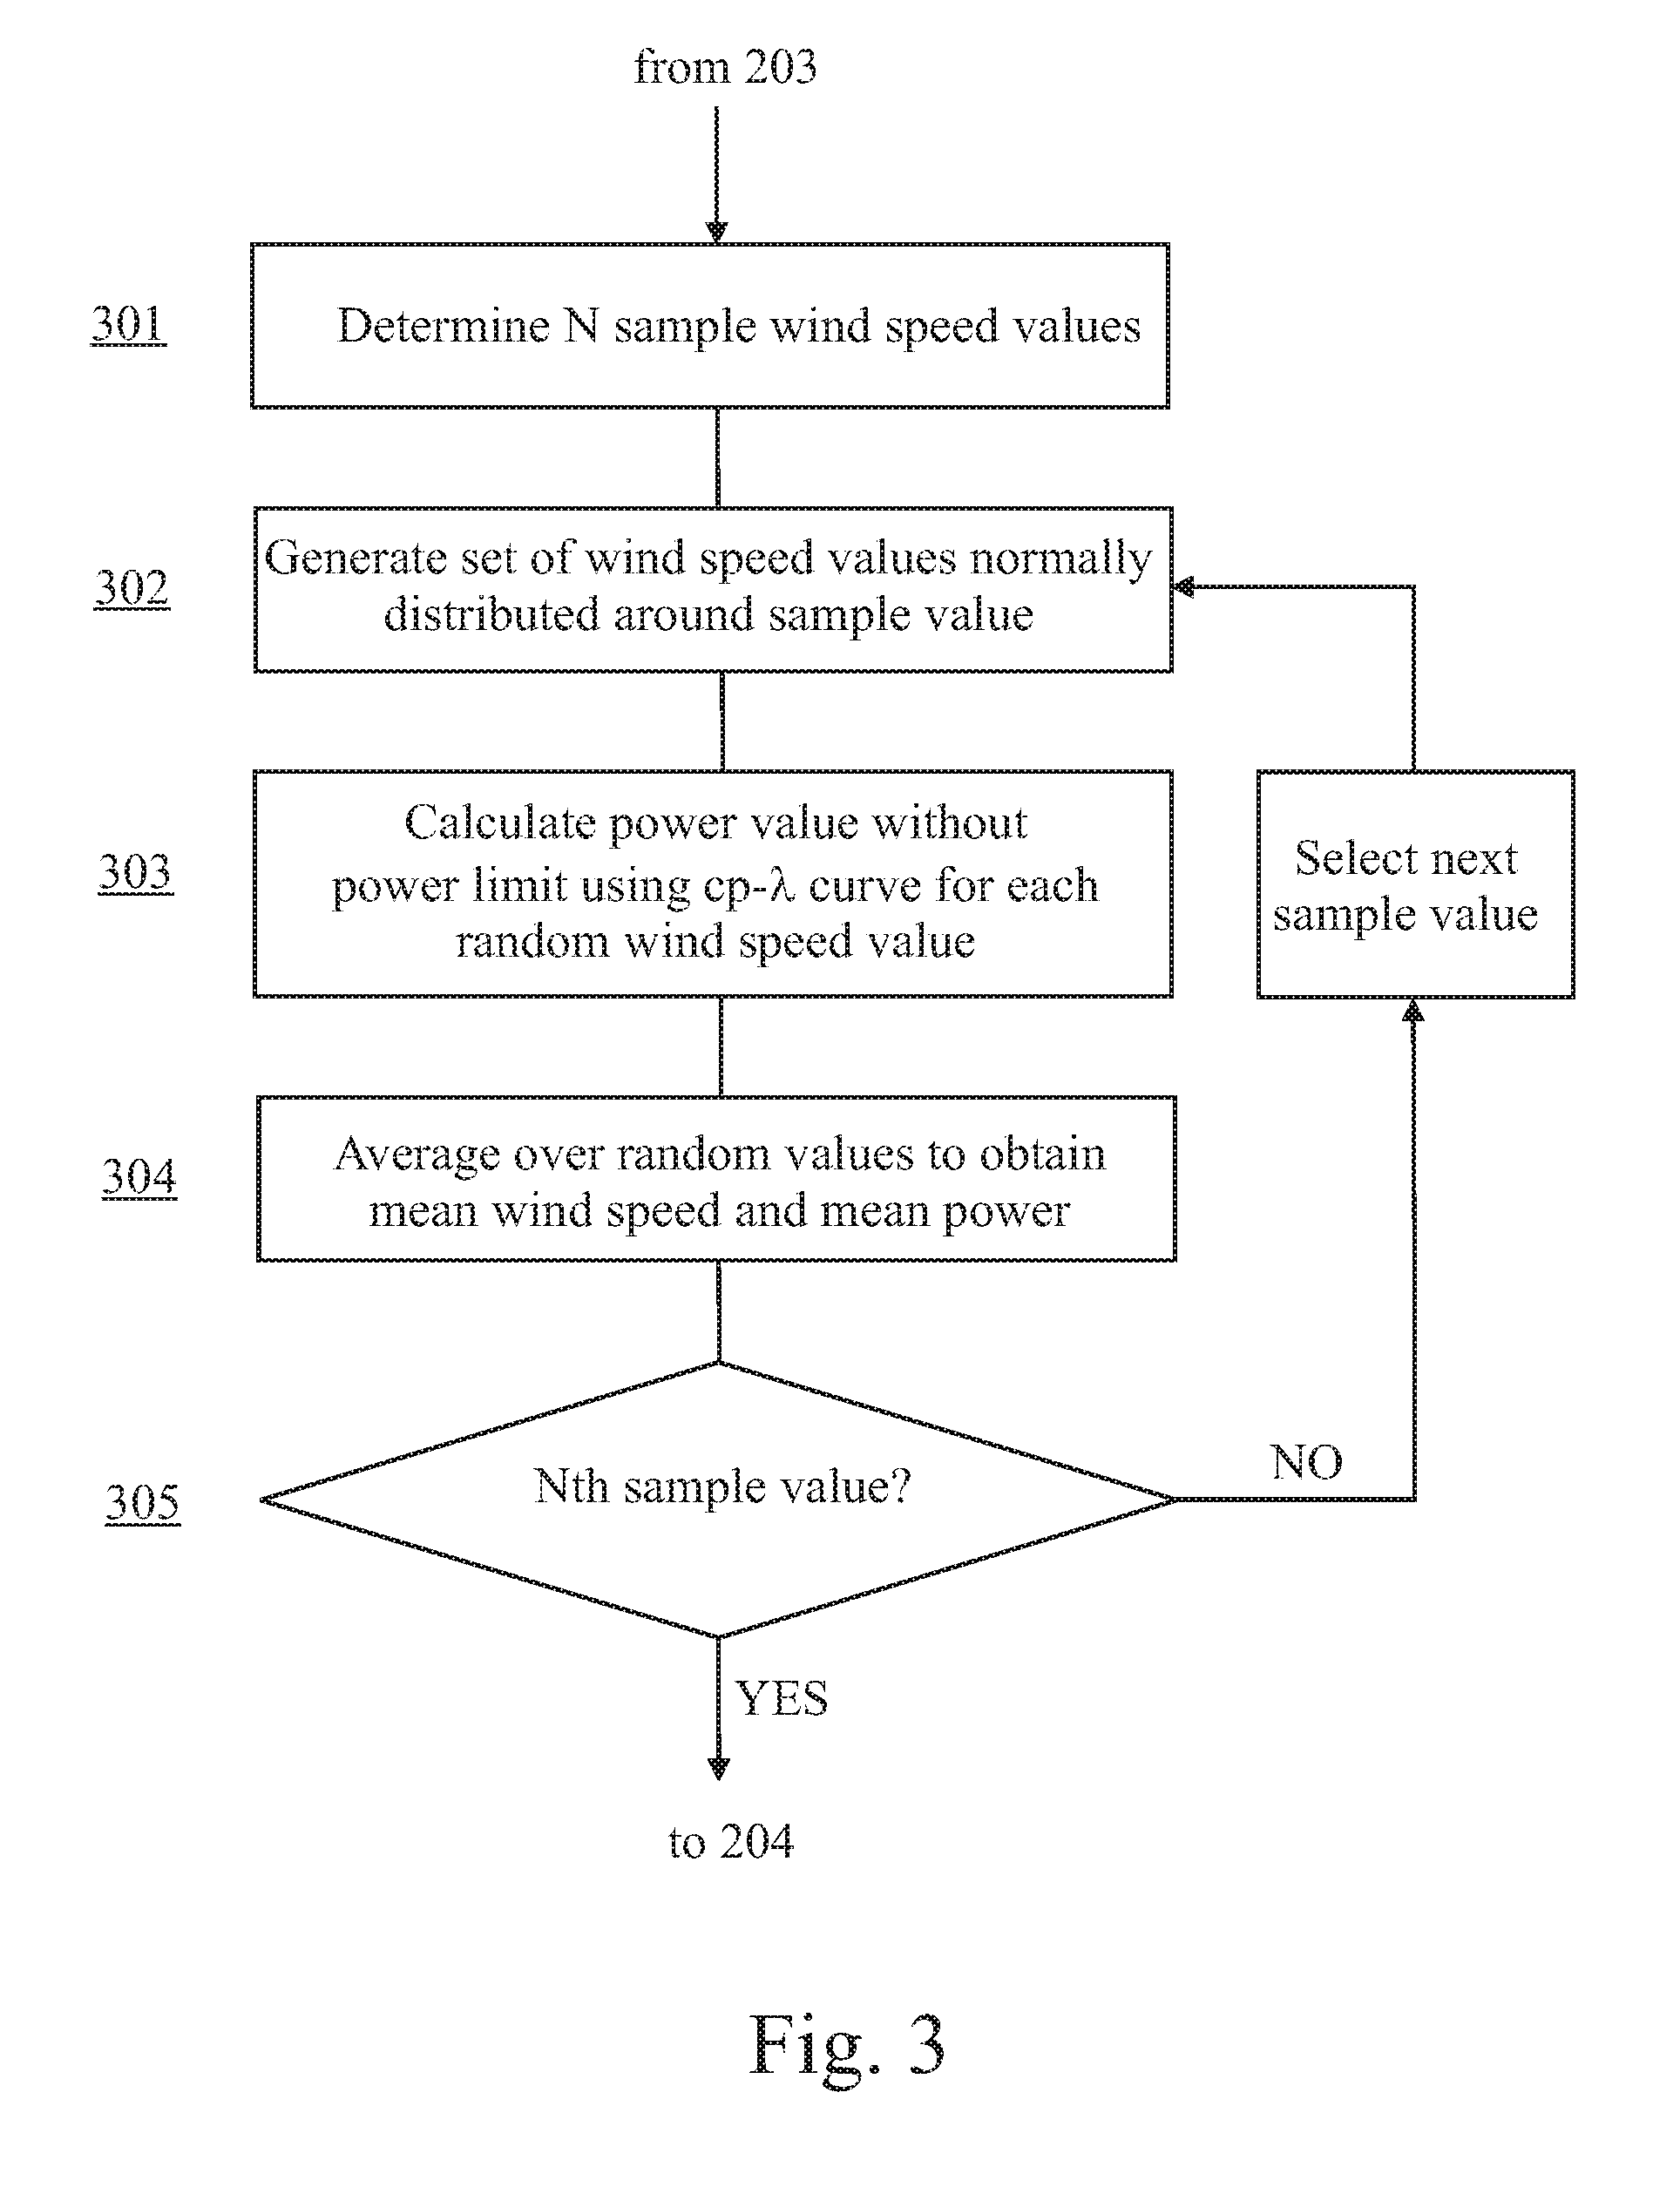 Method for predicting a power curve for a wind turbine